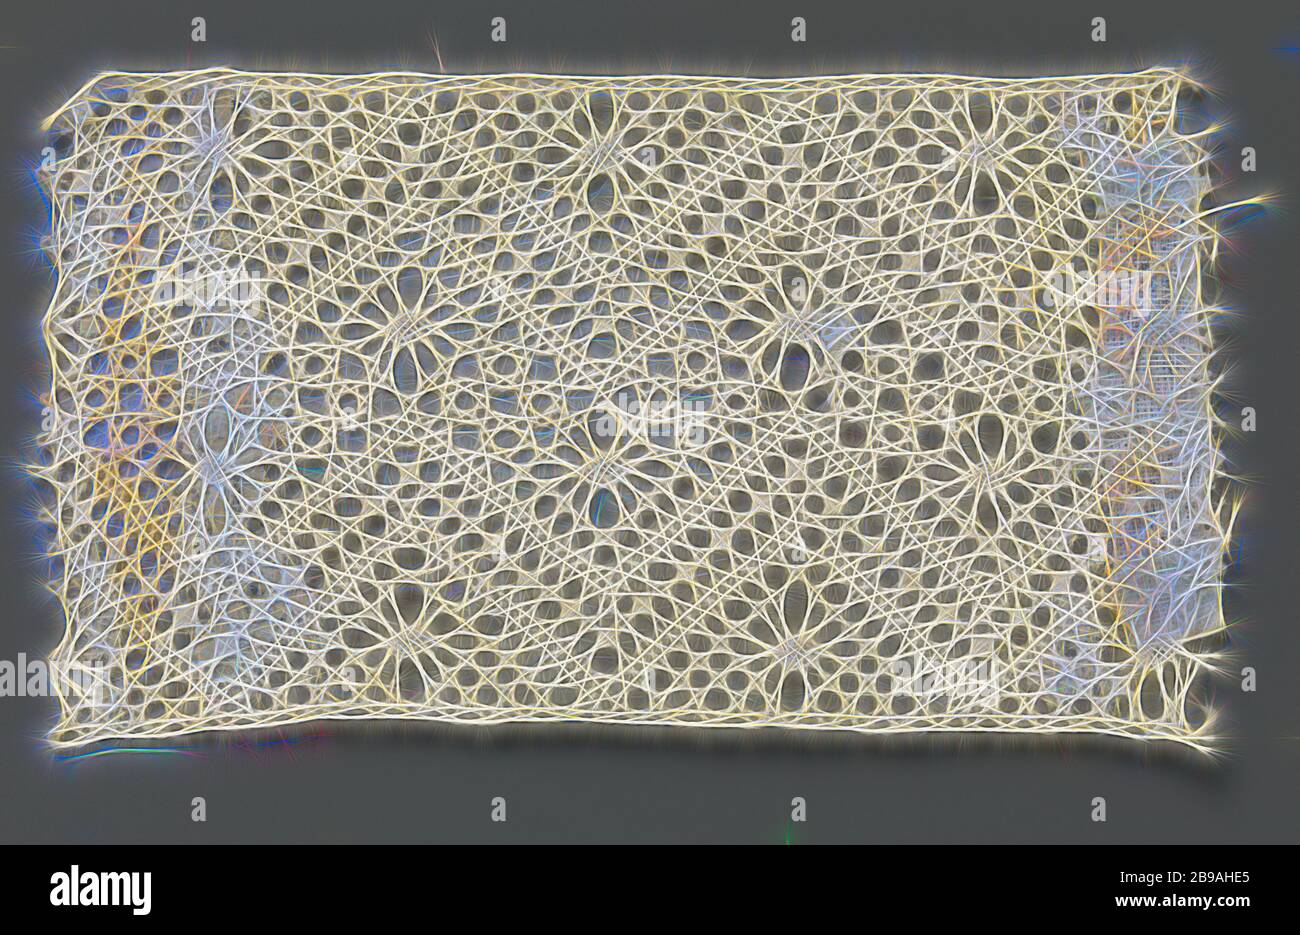 Bobbin-lace insert with two zigzag lines, Natural-colored bobbin lace strip: lace-up. The repeating pattern consists of two parallel zigzag paths with a center line of concatenated fine diamonds made in form. At the top and bottom of the zigzag webs, a sling is used, and between the zigzag webs a twisted cross-streaked soil is used. There are pointed oval spots in the grounds. The top and bottom of the strip are finished straight., anonymous, Russia (possibly), c. 1900, linen (material), torchon lace, l 8 cm × w 4.5 cm ×, 2.6 cm, Reimagined by Gibon, design of warm cheerful glowing of brightne Stock Photo